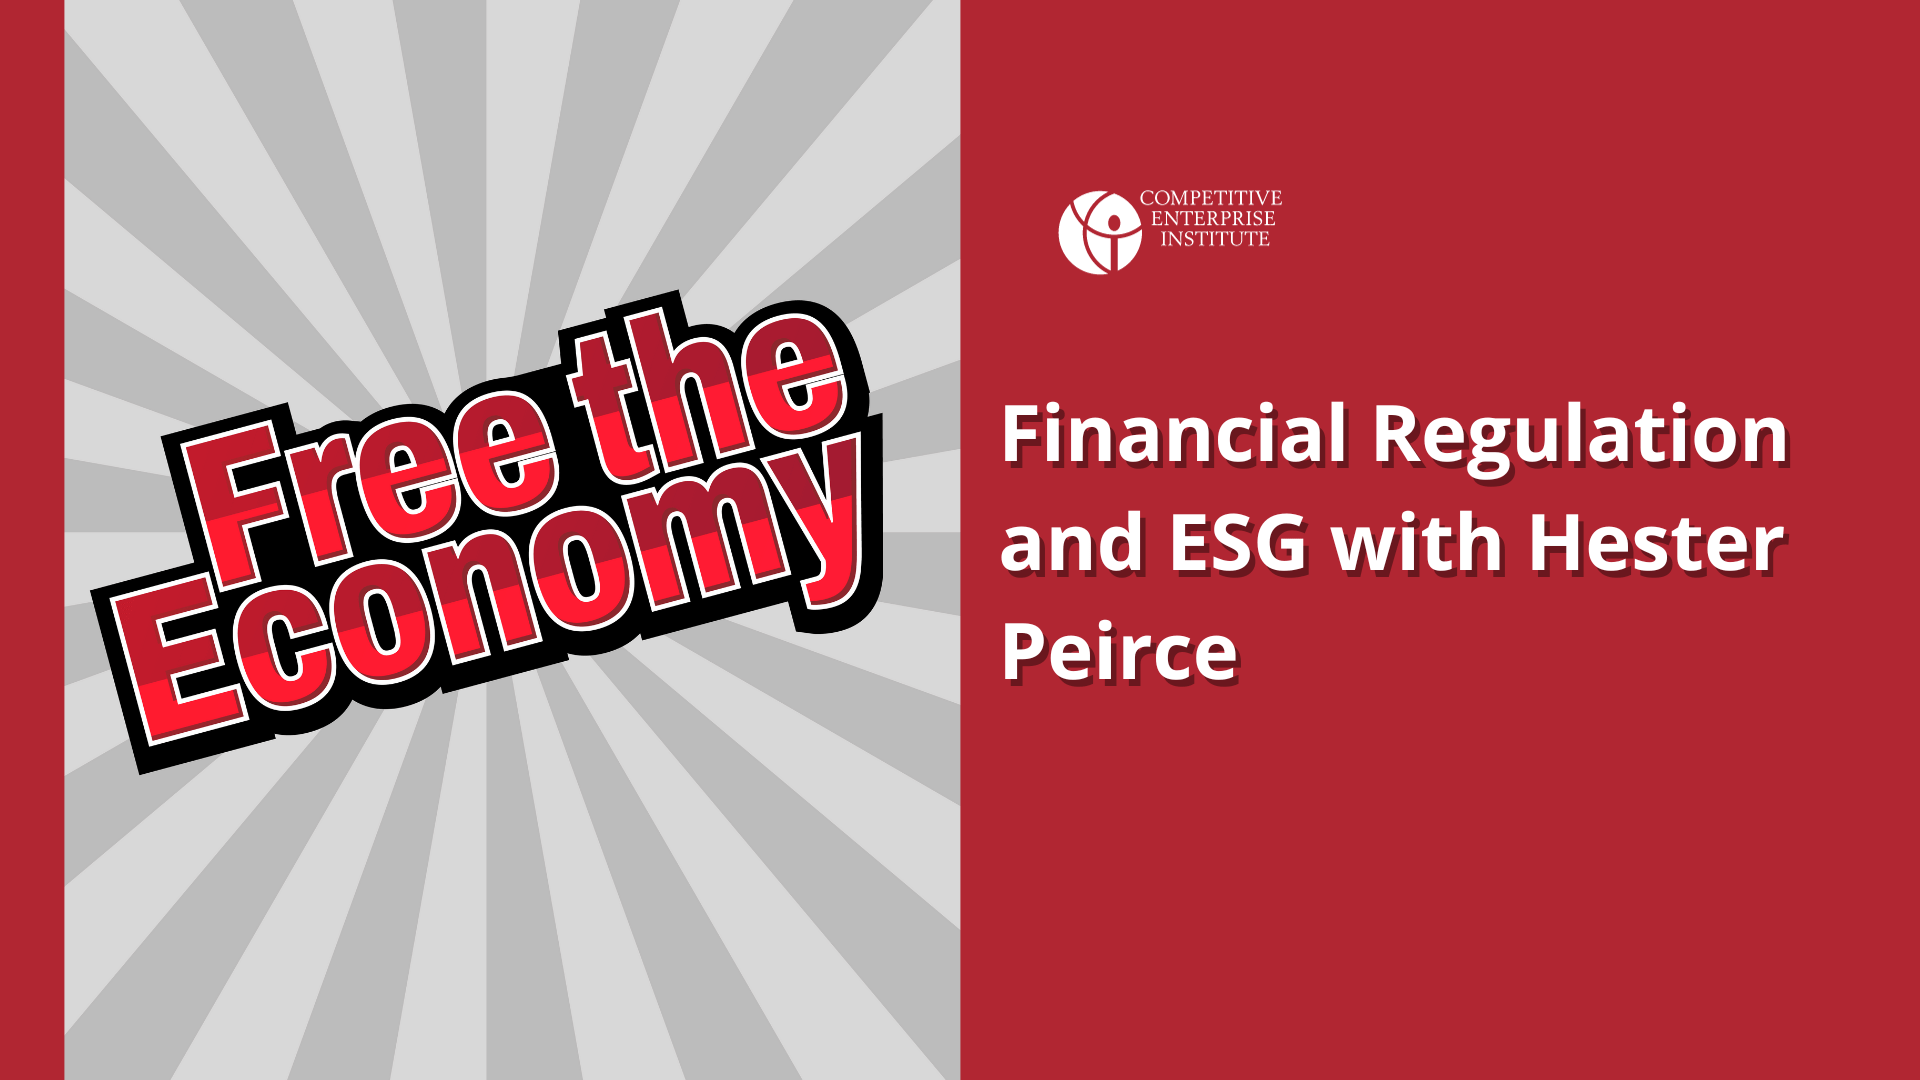 Financial Regulation and ESG with Hester Peirce